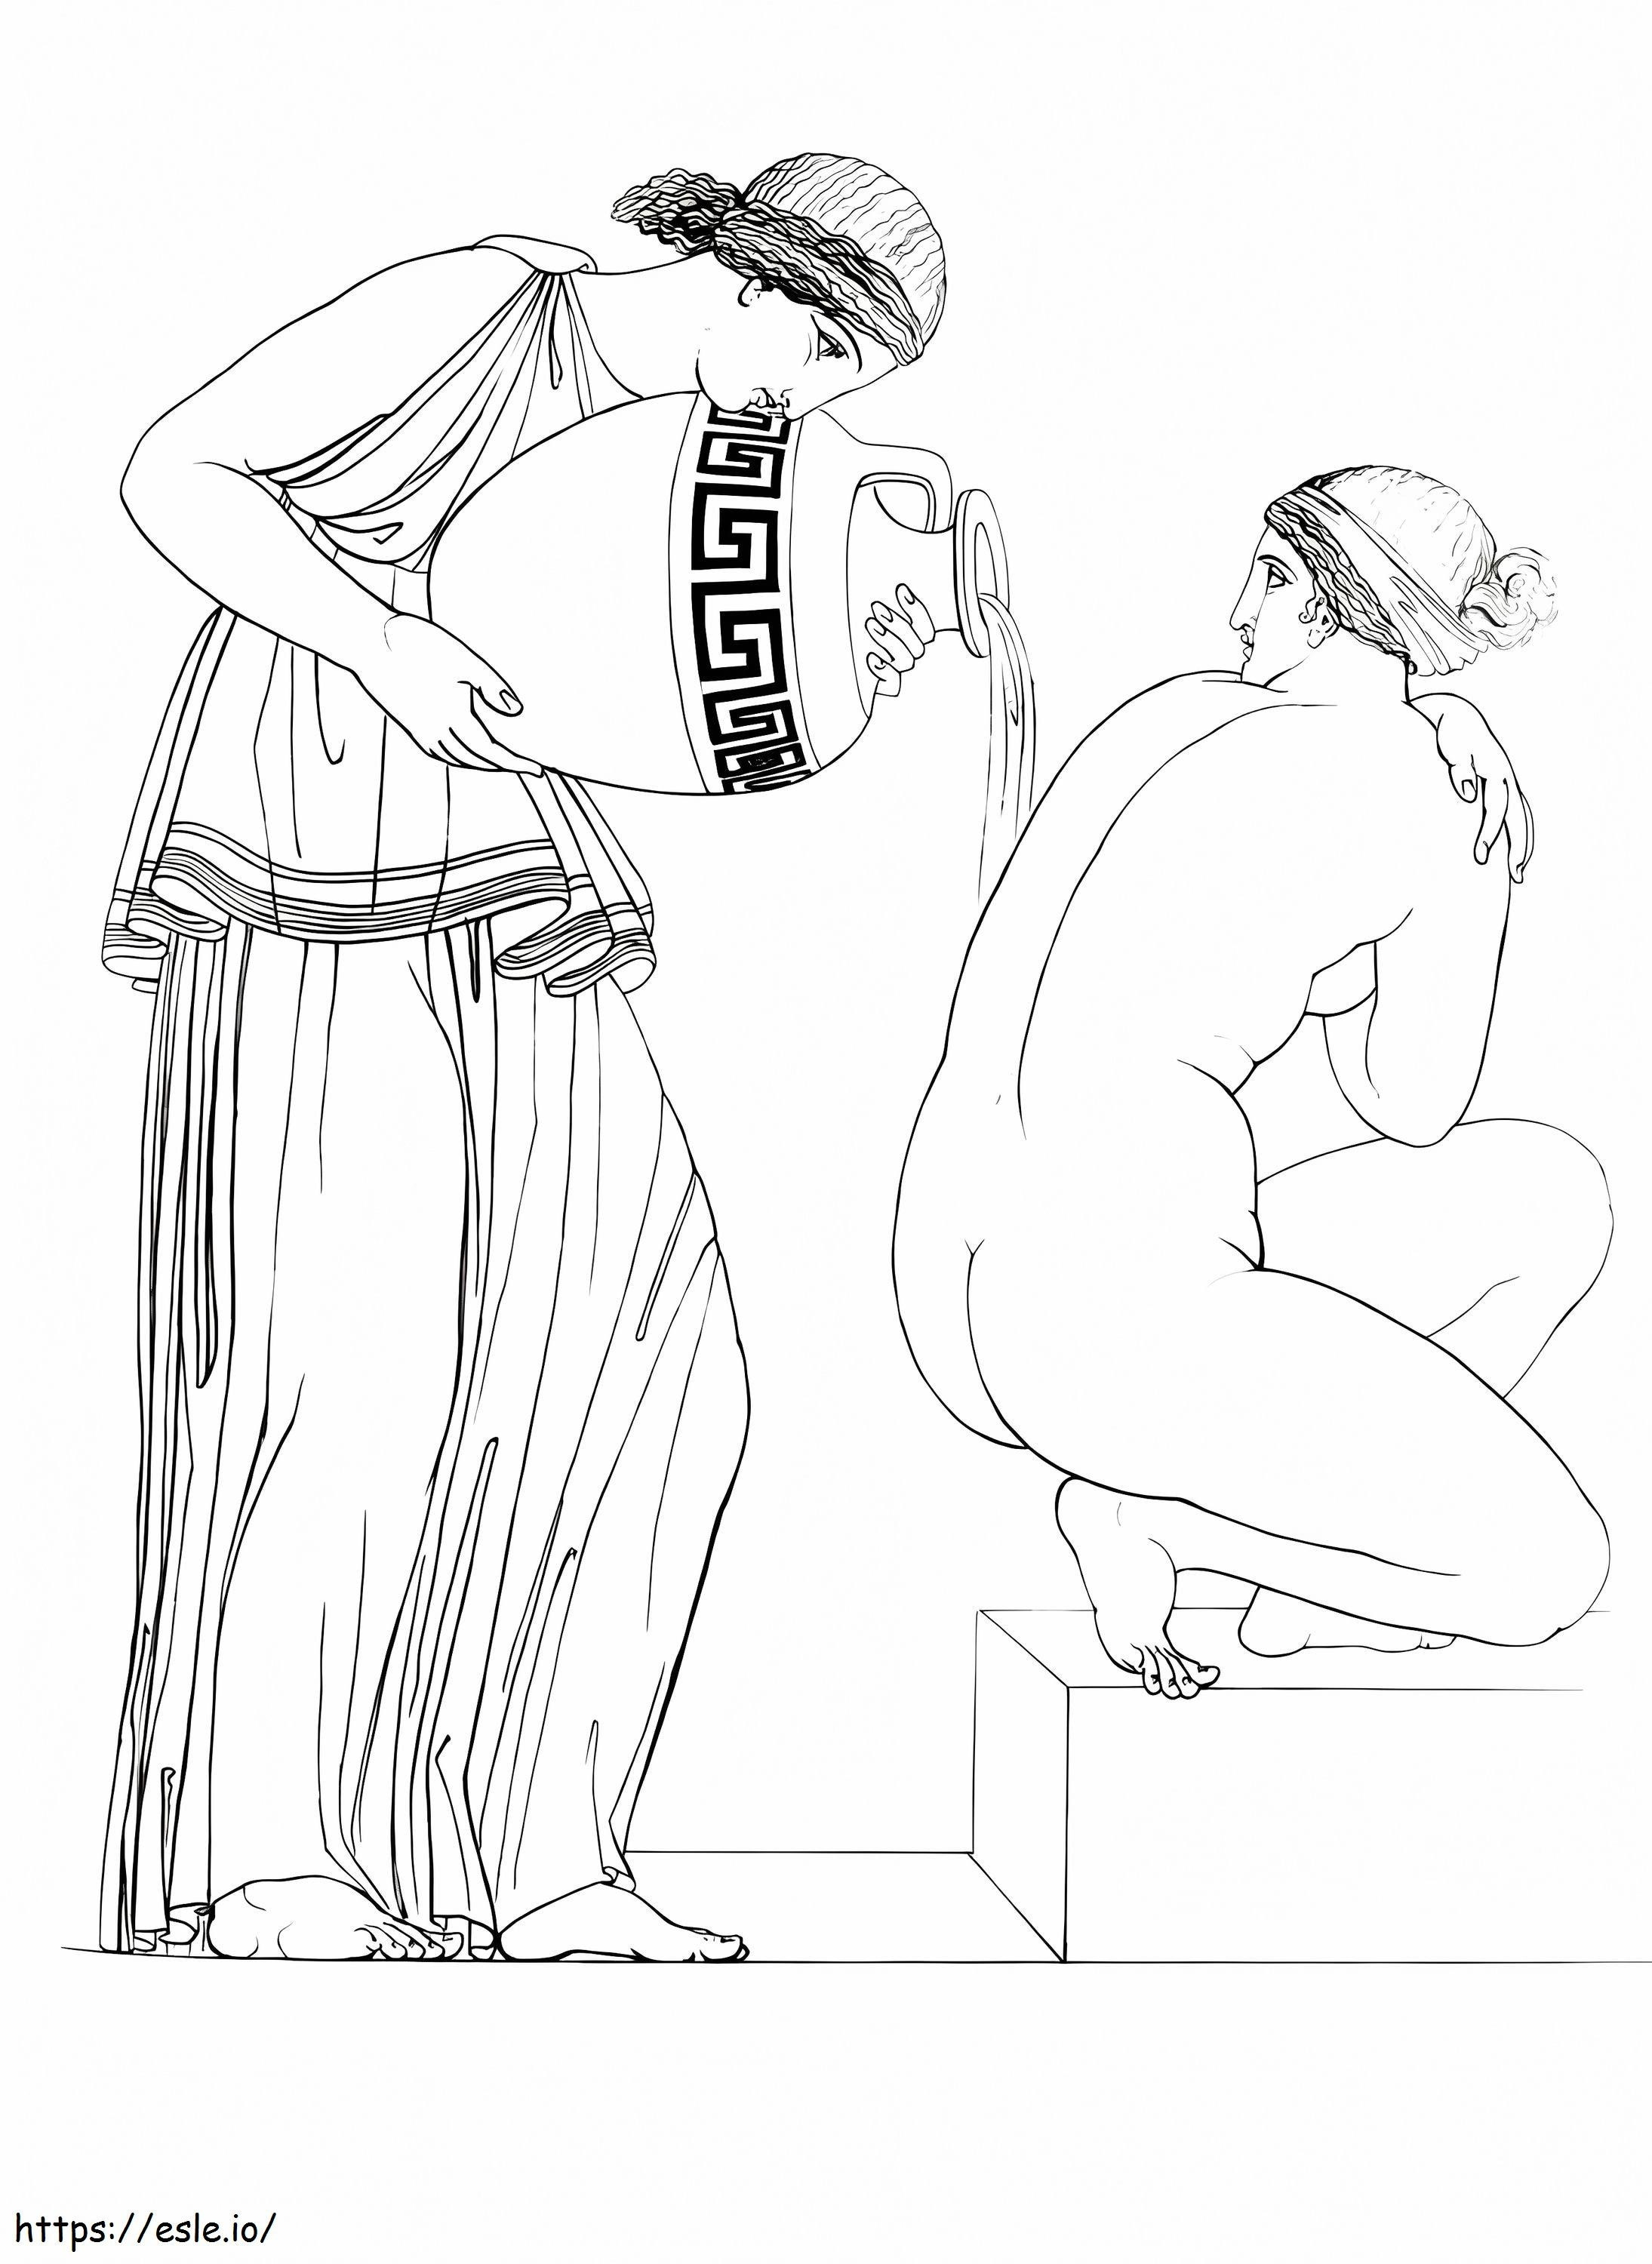 Grecian Lady At The Bath coloring page